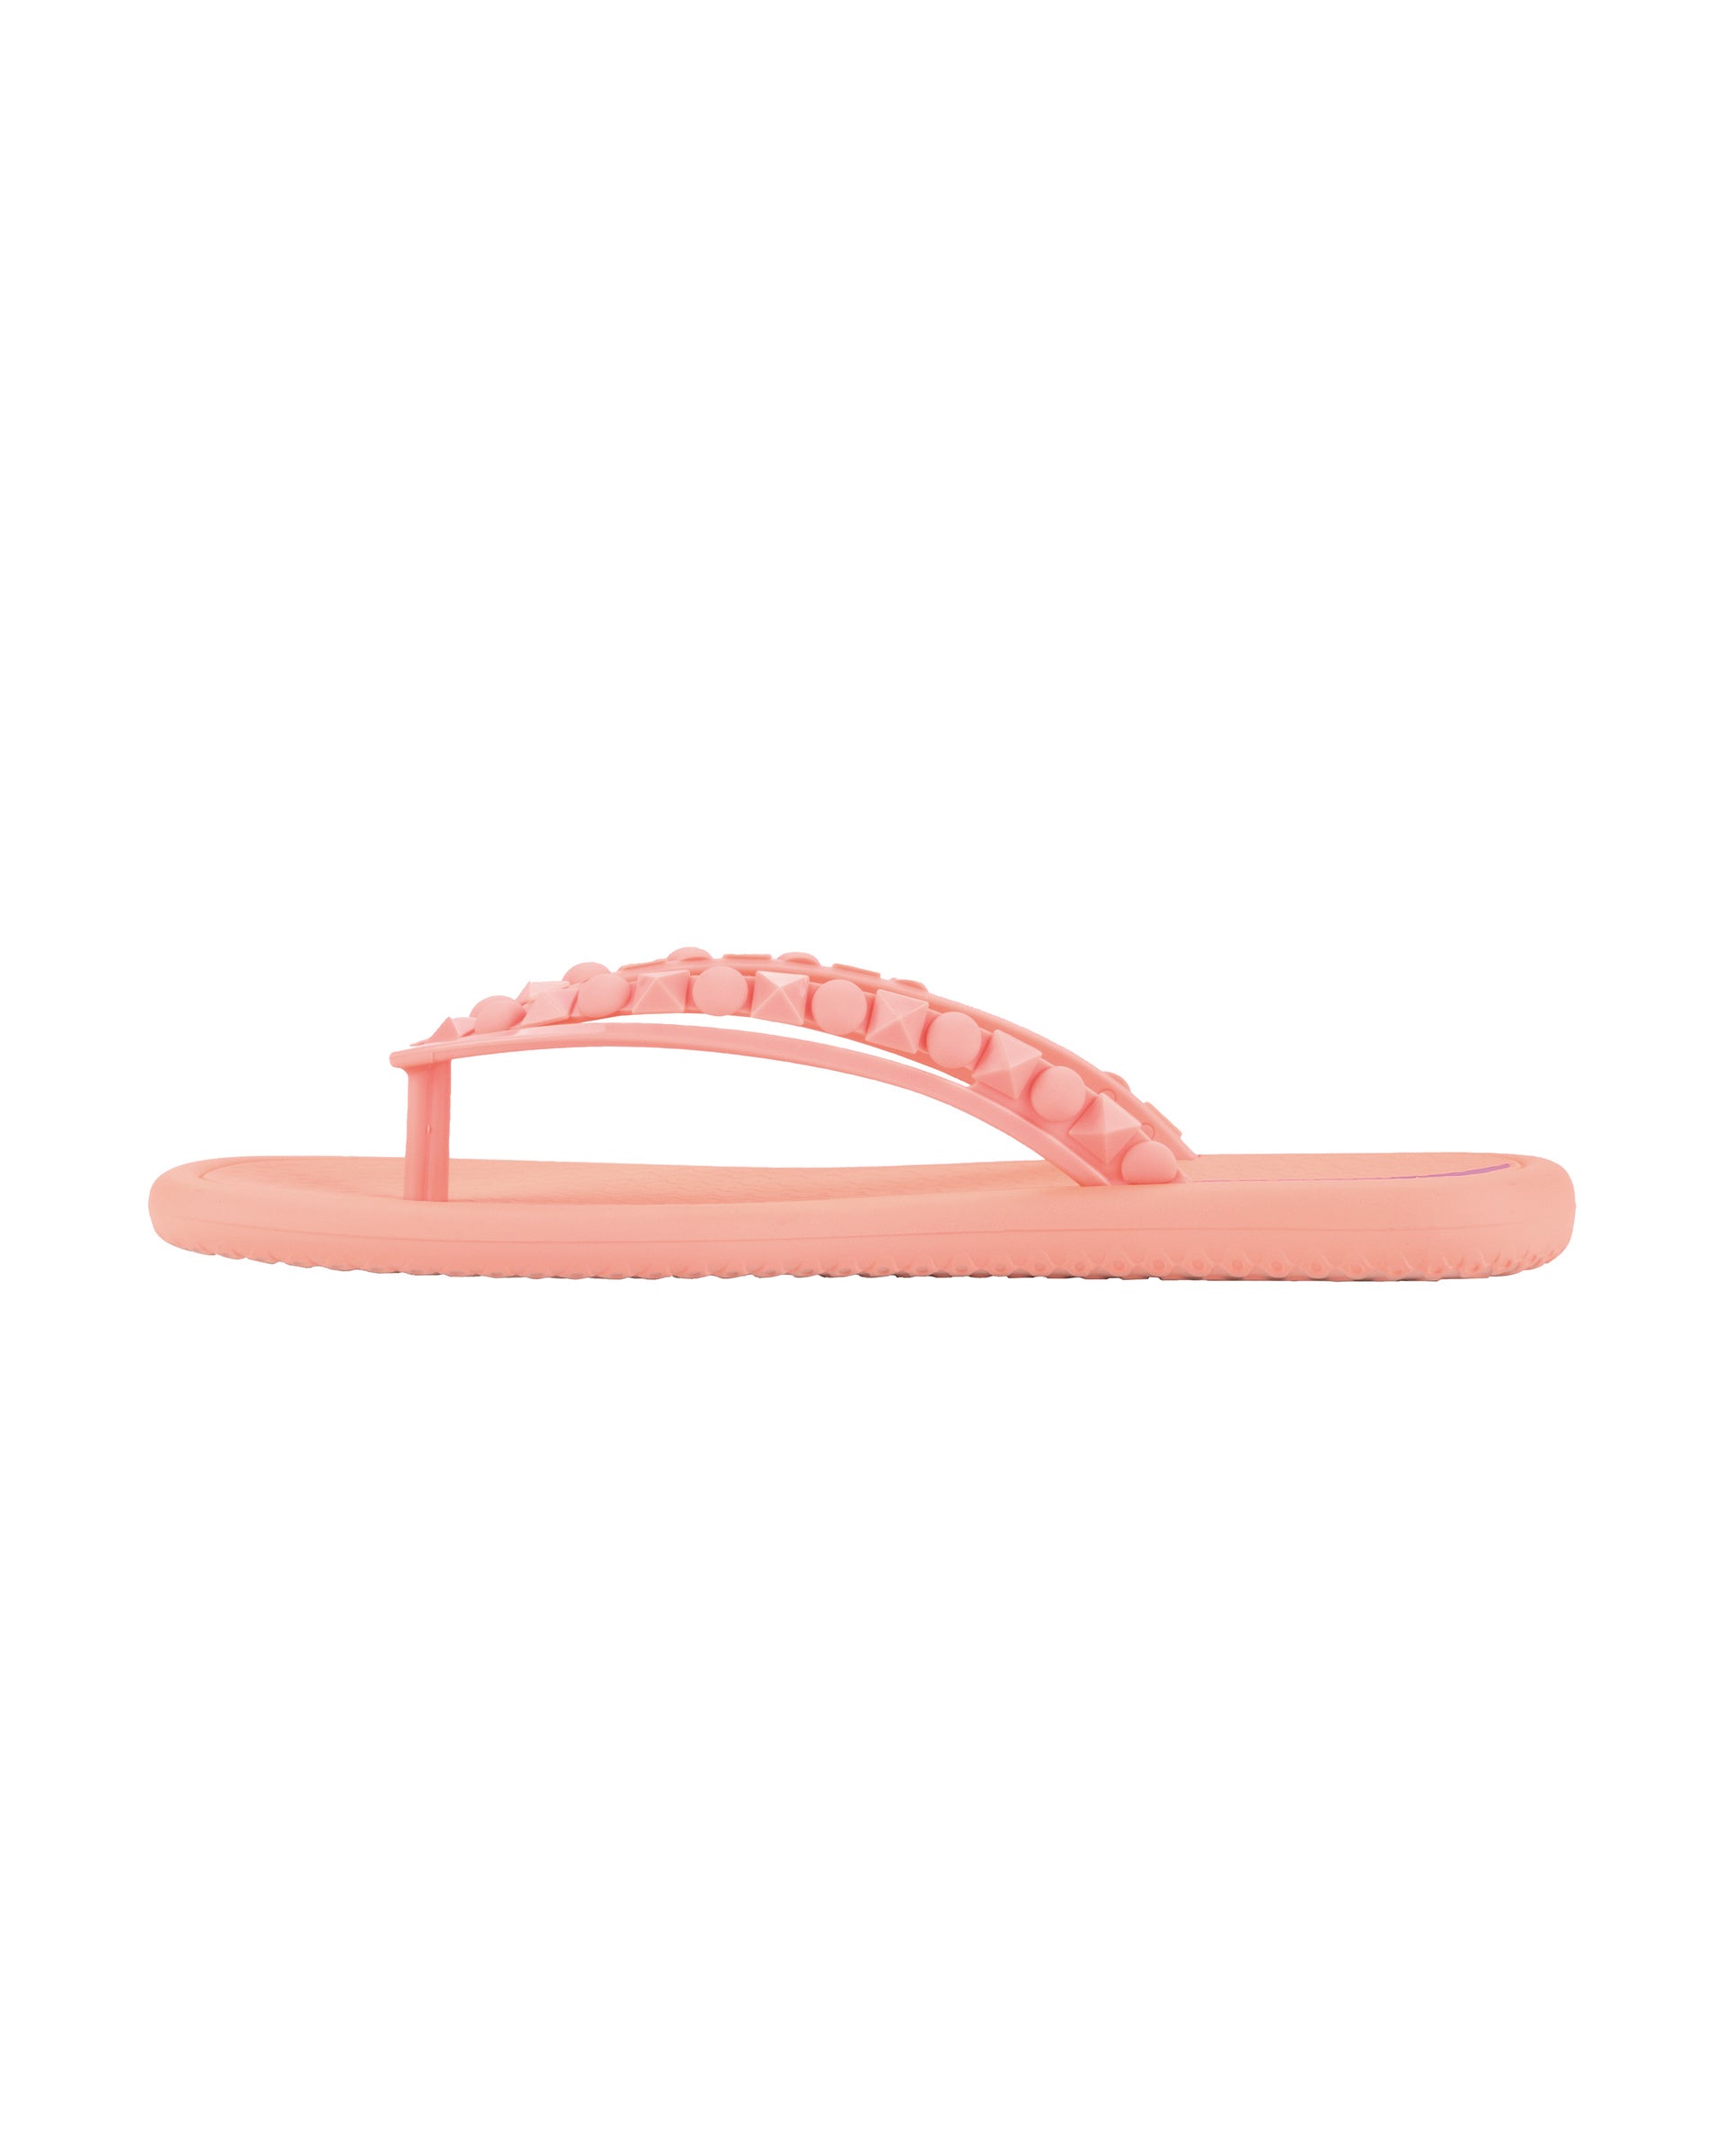 Side view of a light pink Ipanema Meu Sol women's flip flop with stud details on strap.